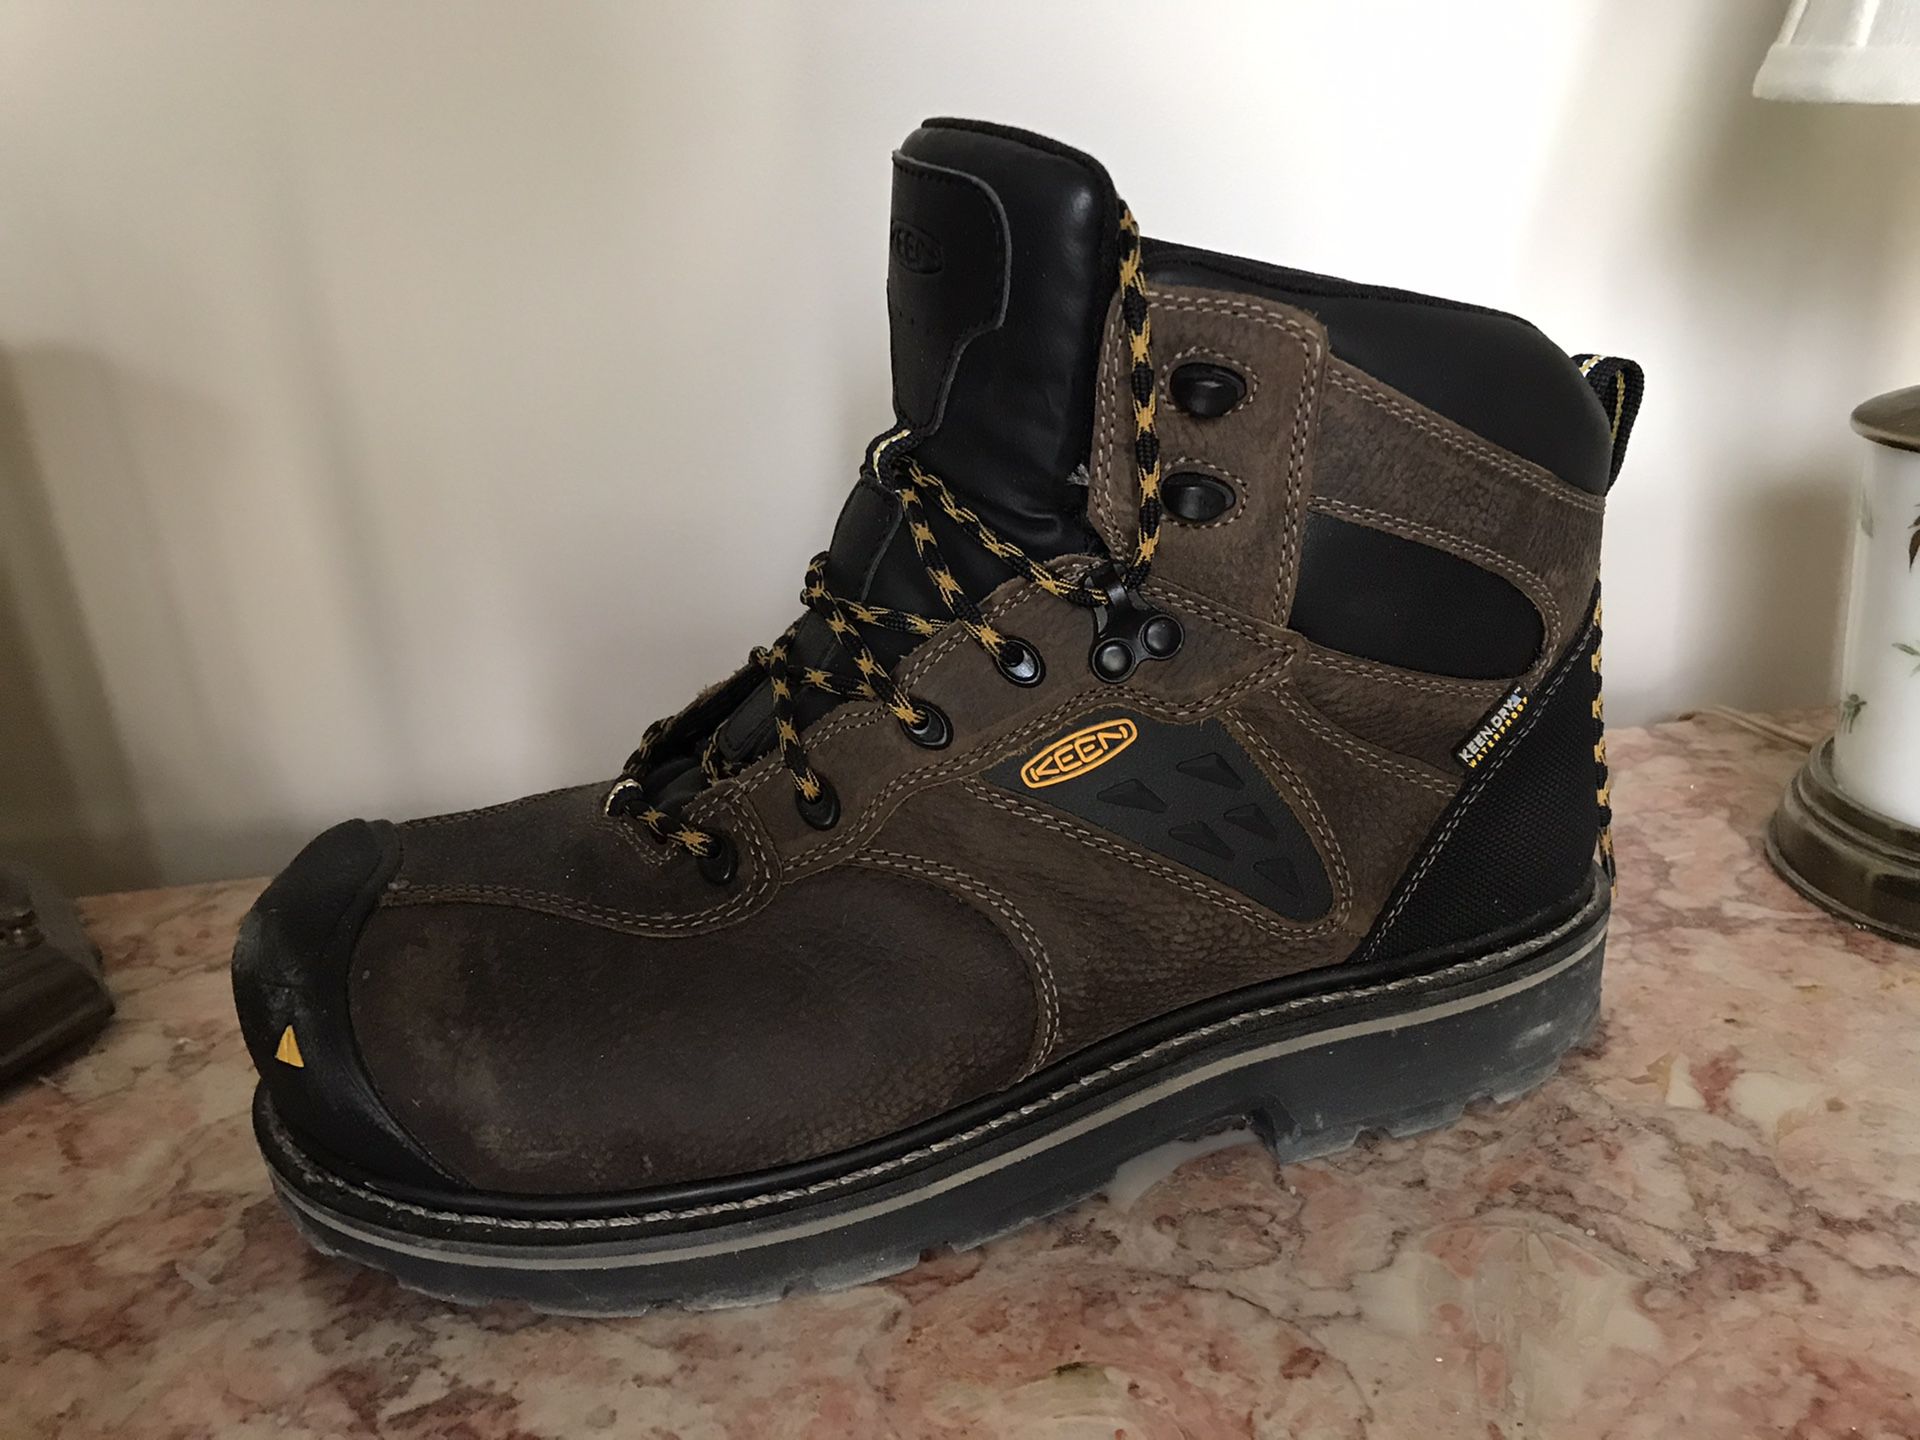 Keen Work Boots US size 11EE